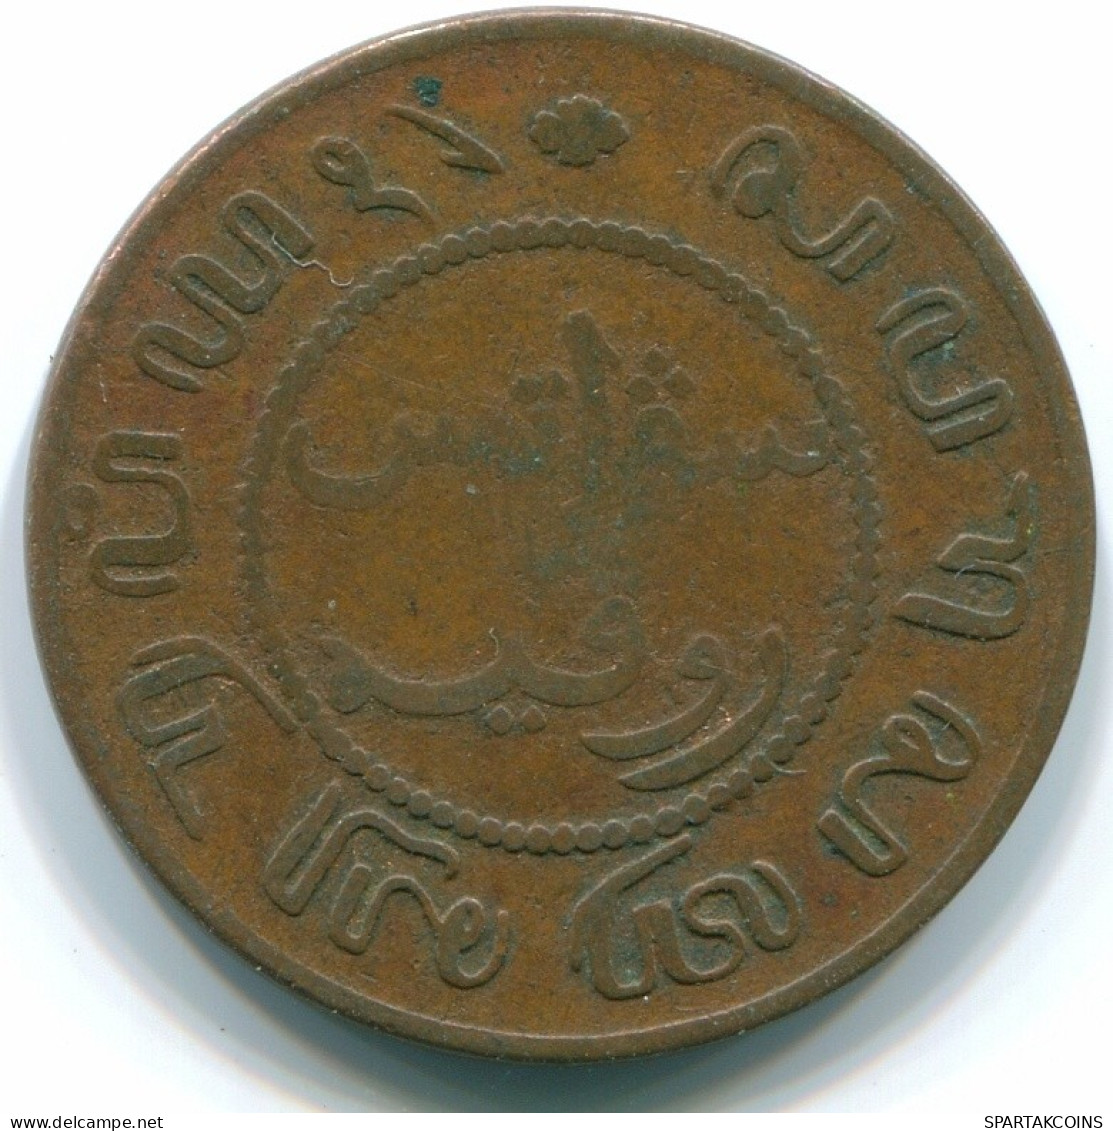 1 CENT 1857 NETHERLANDS EAST INDIES INDONESIA Copper Colonial Coin #S10041.U.A - Indes Neerlandesas